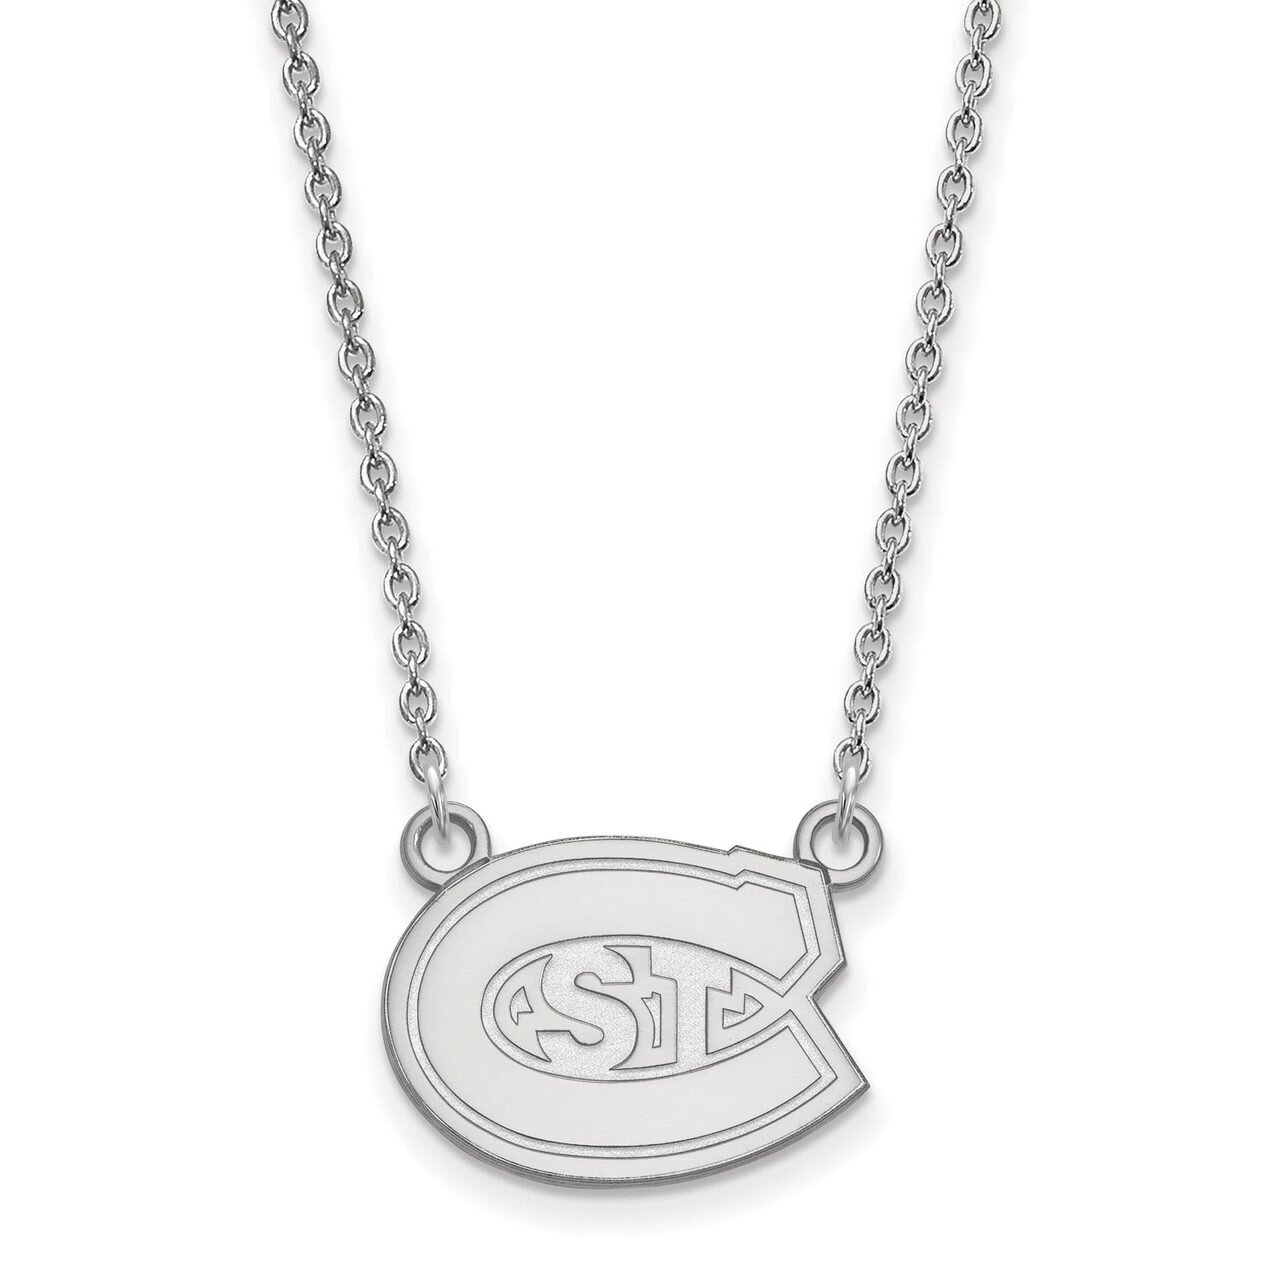 Saint Cloud State Small Pendant with Chain Necklace Sterling Silver SS008STC-18